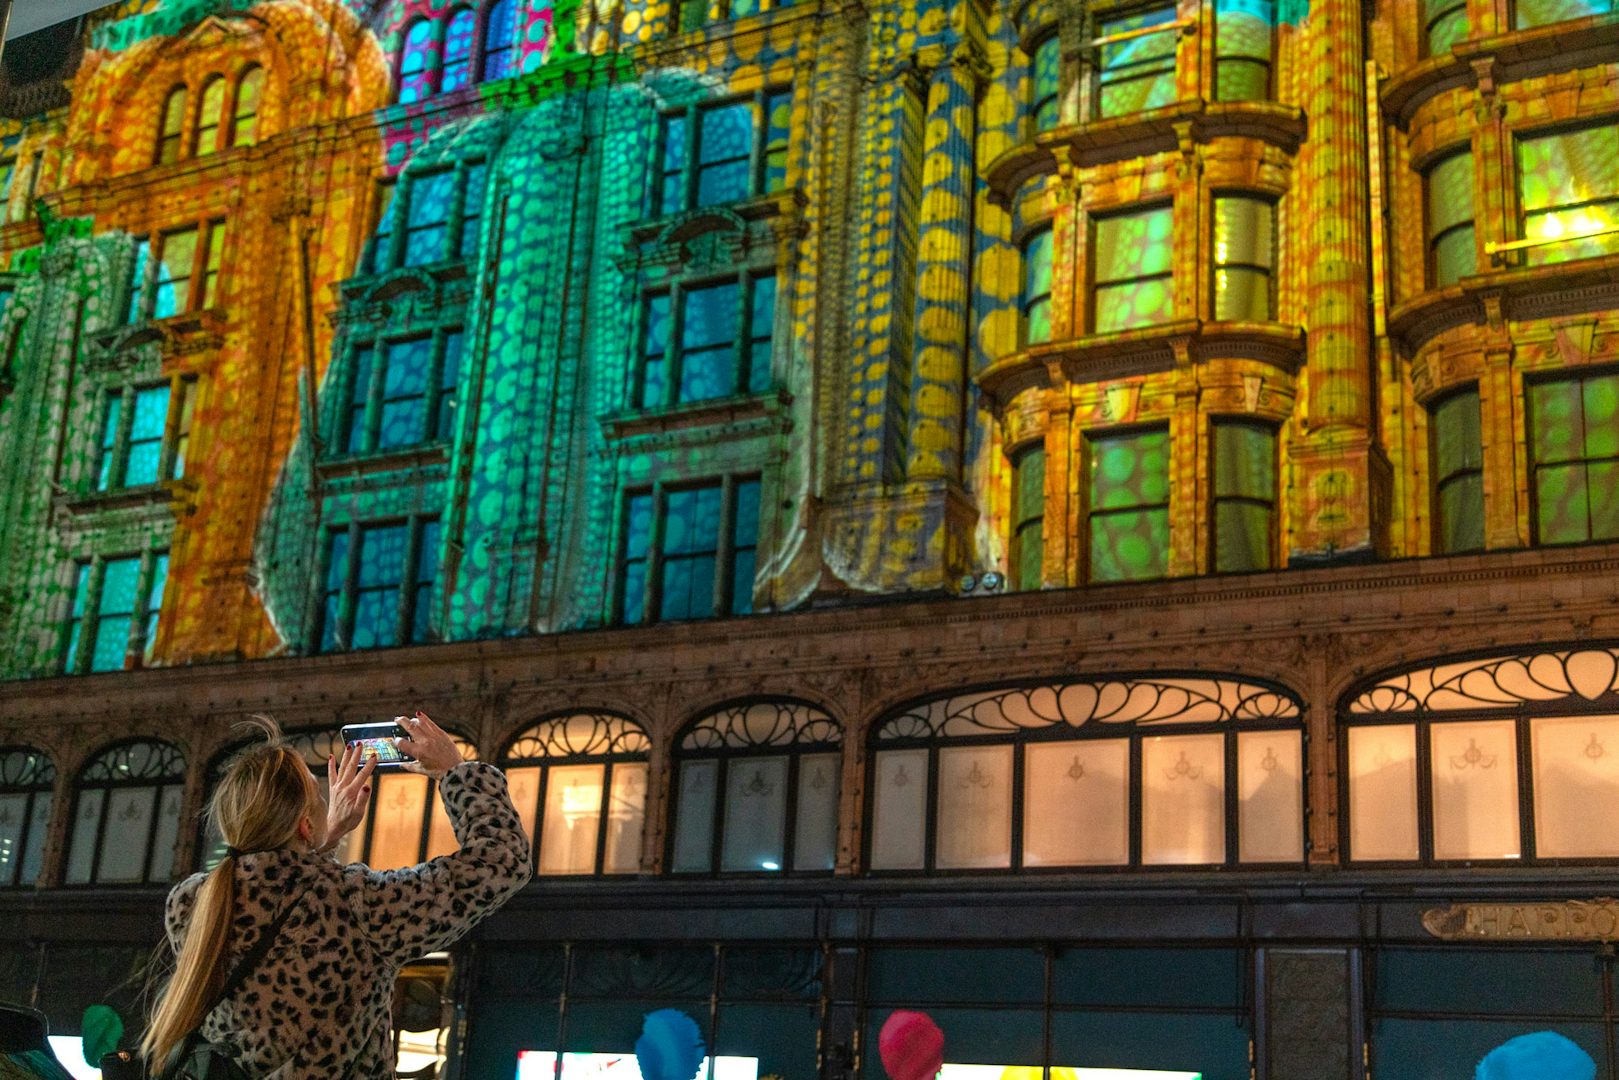 Louis Vuitton has covered Harrods in polka dots